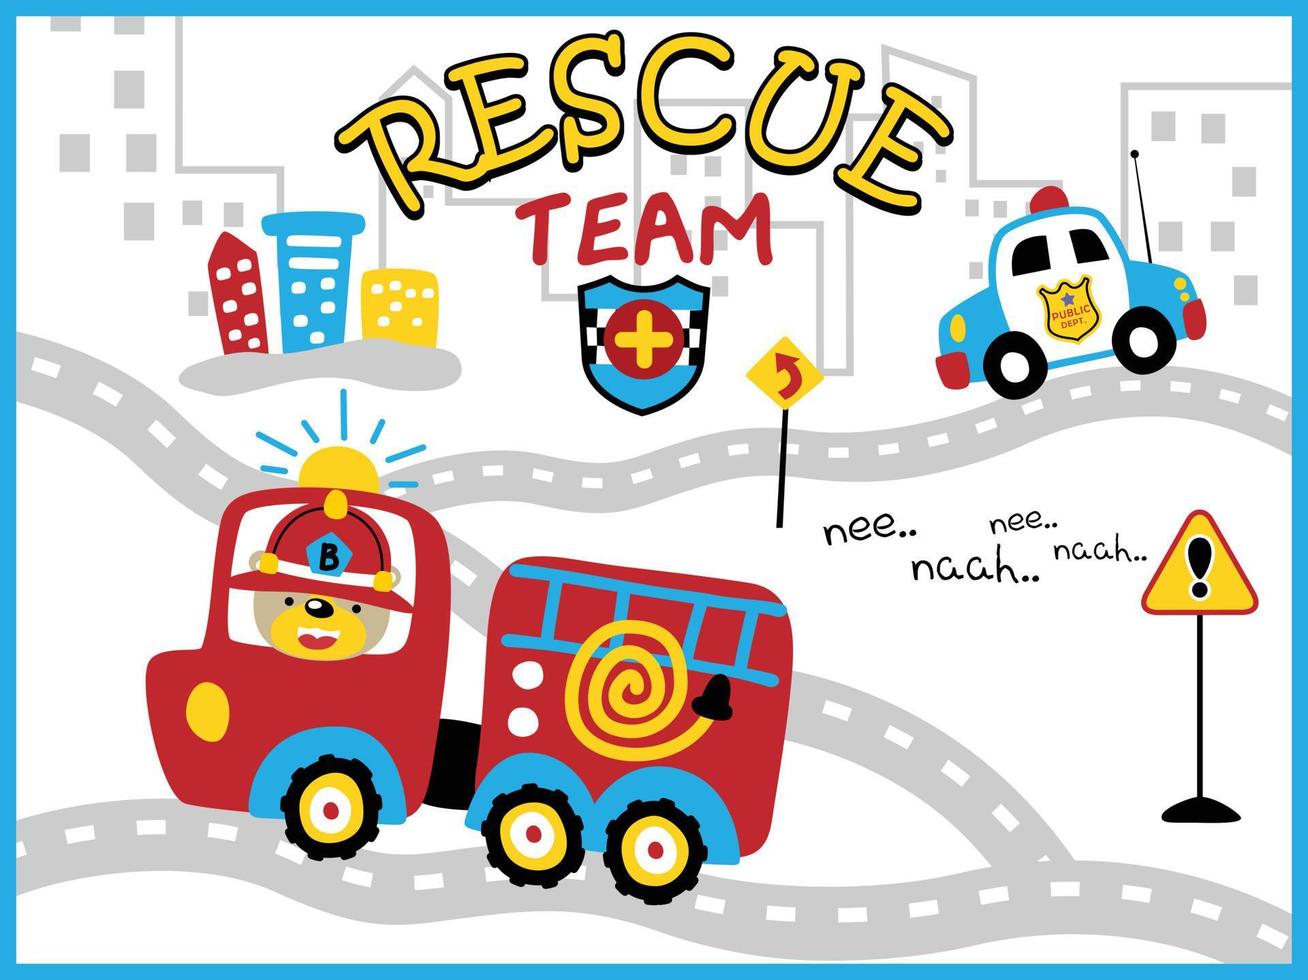 Vector of rescue vehicle cartoon with funny bear driving fire truck, city traffic elements cartoon